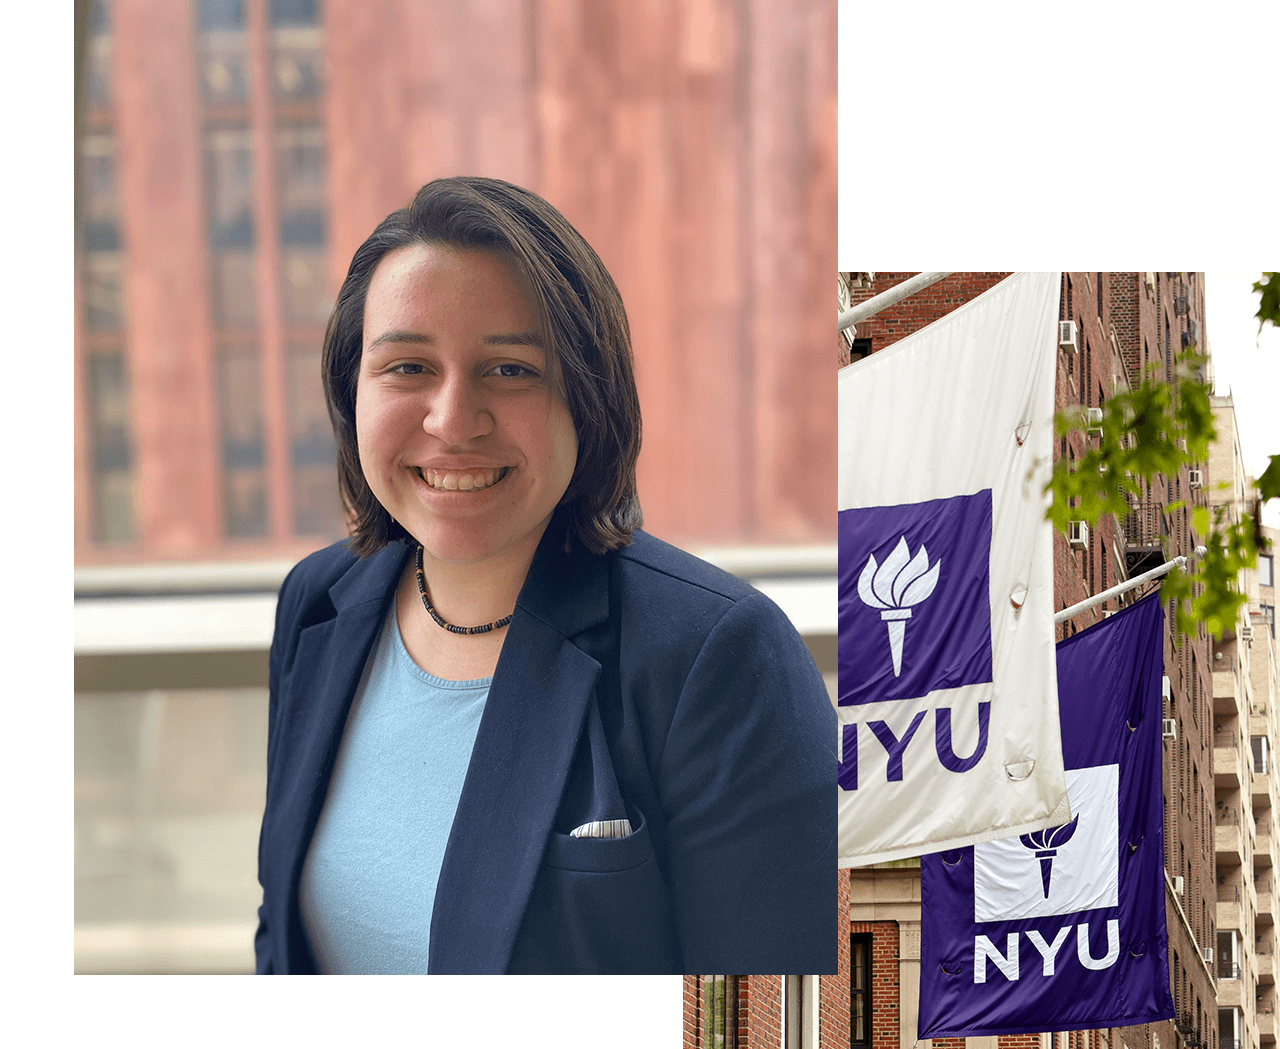 A collage of two images (clockwise): 1) A professional headshot of Carolyn Vaca 2) NYU flags hanging from a building